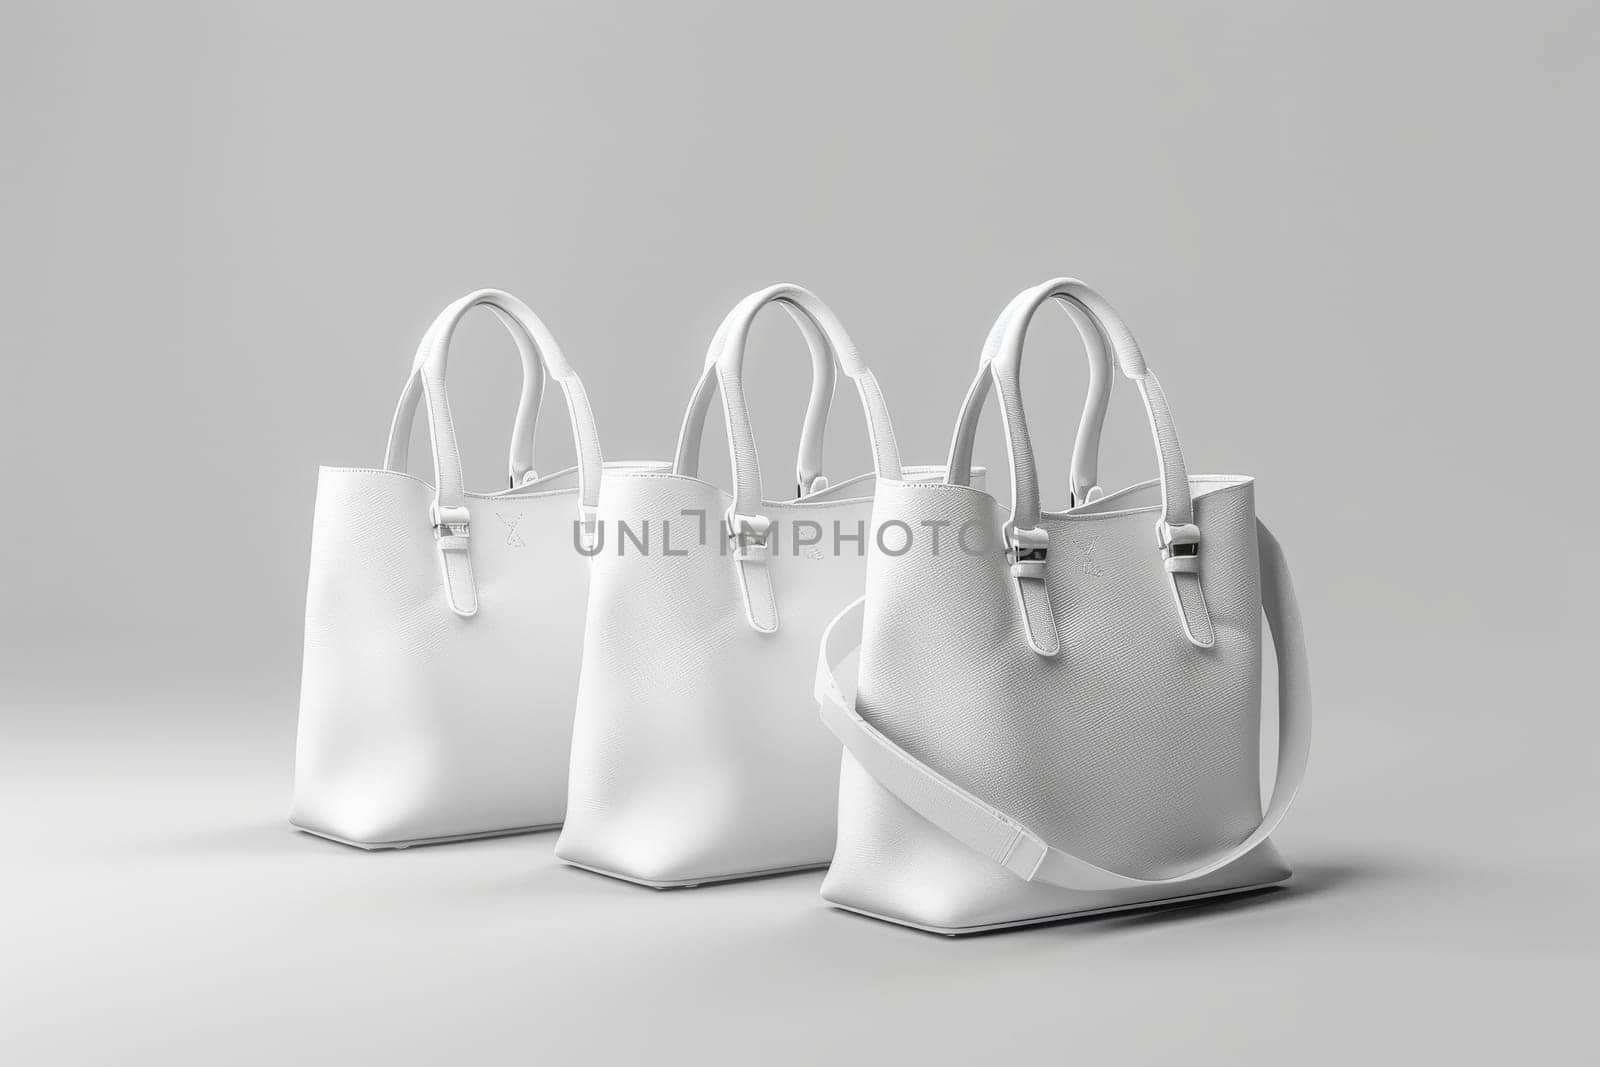 Mockup Luxury Women's handbags made by leather by itchaznong